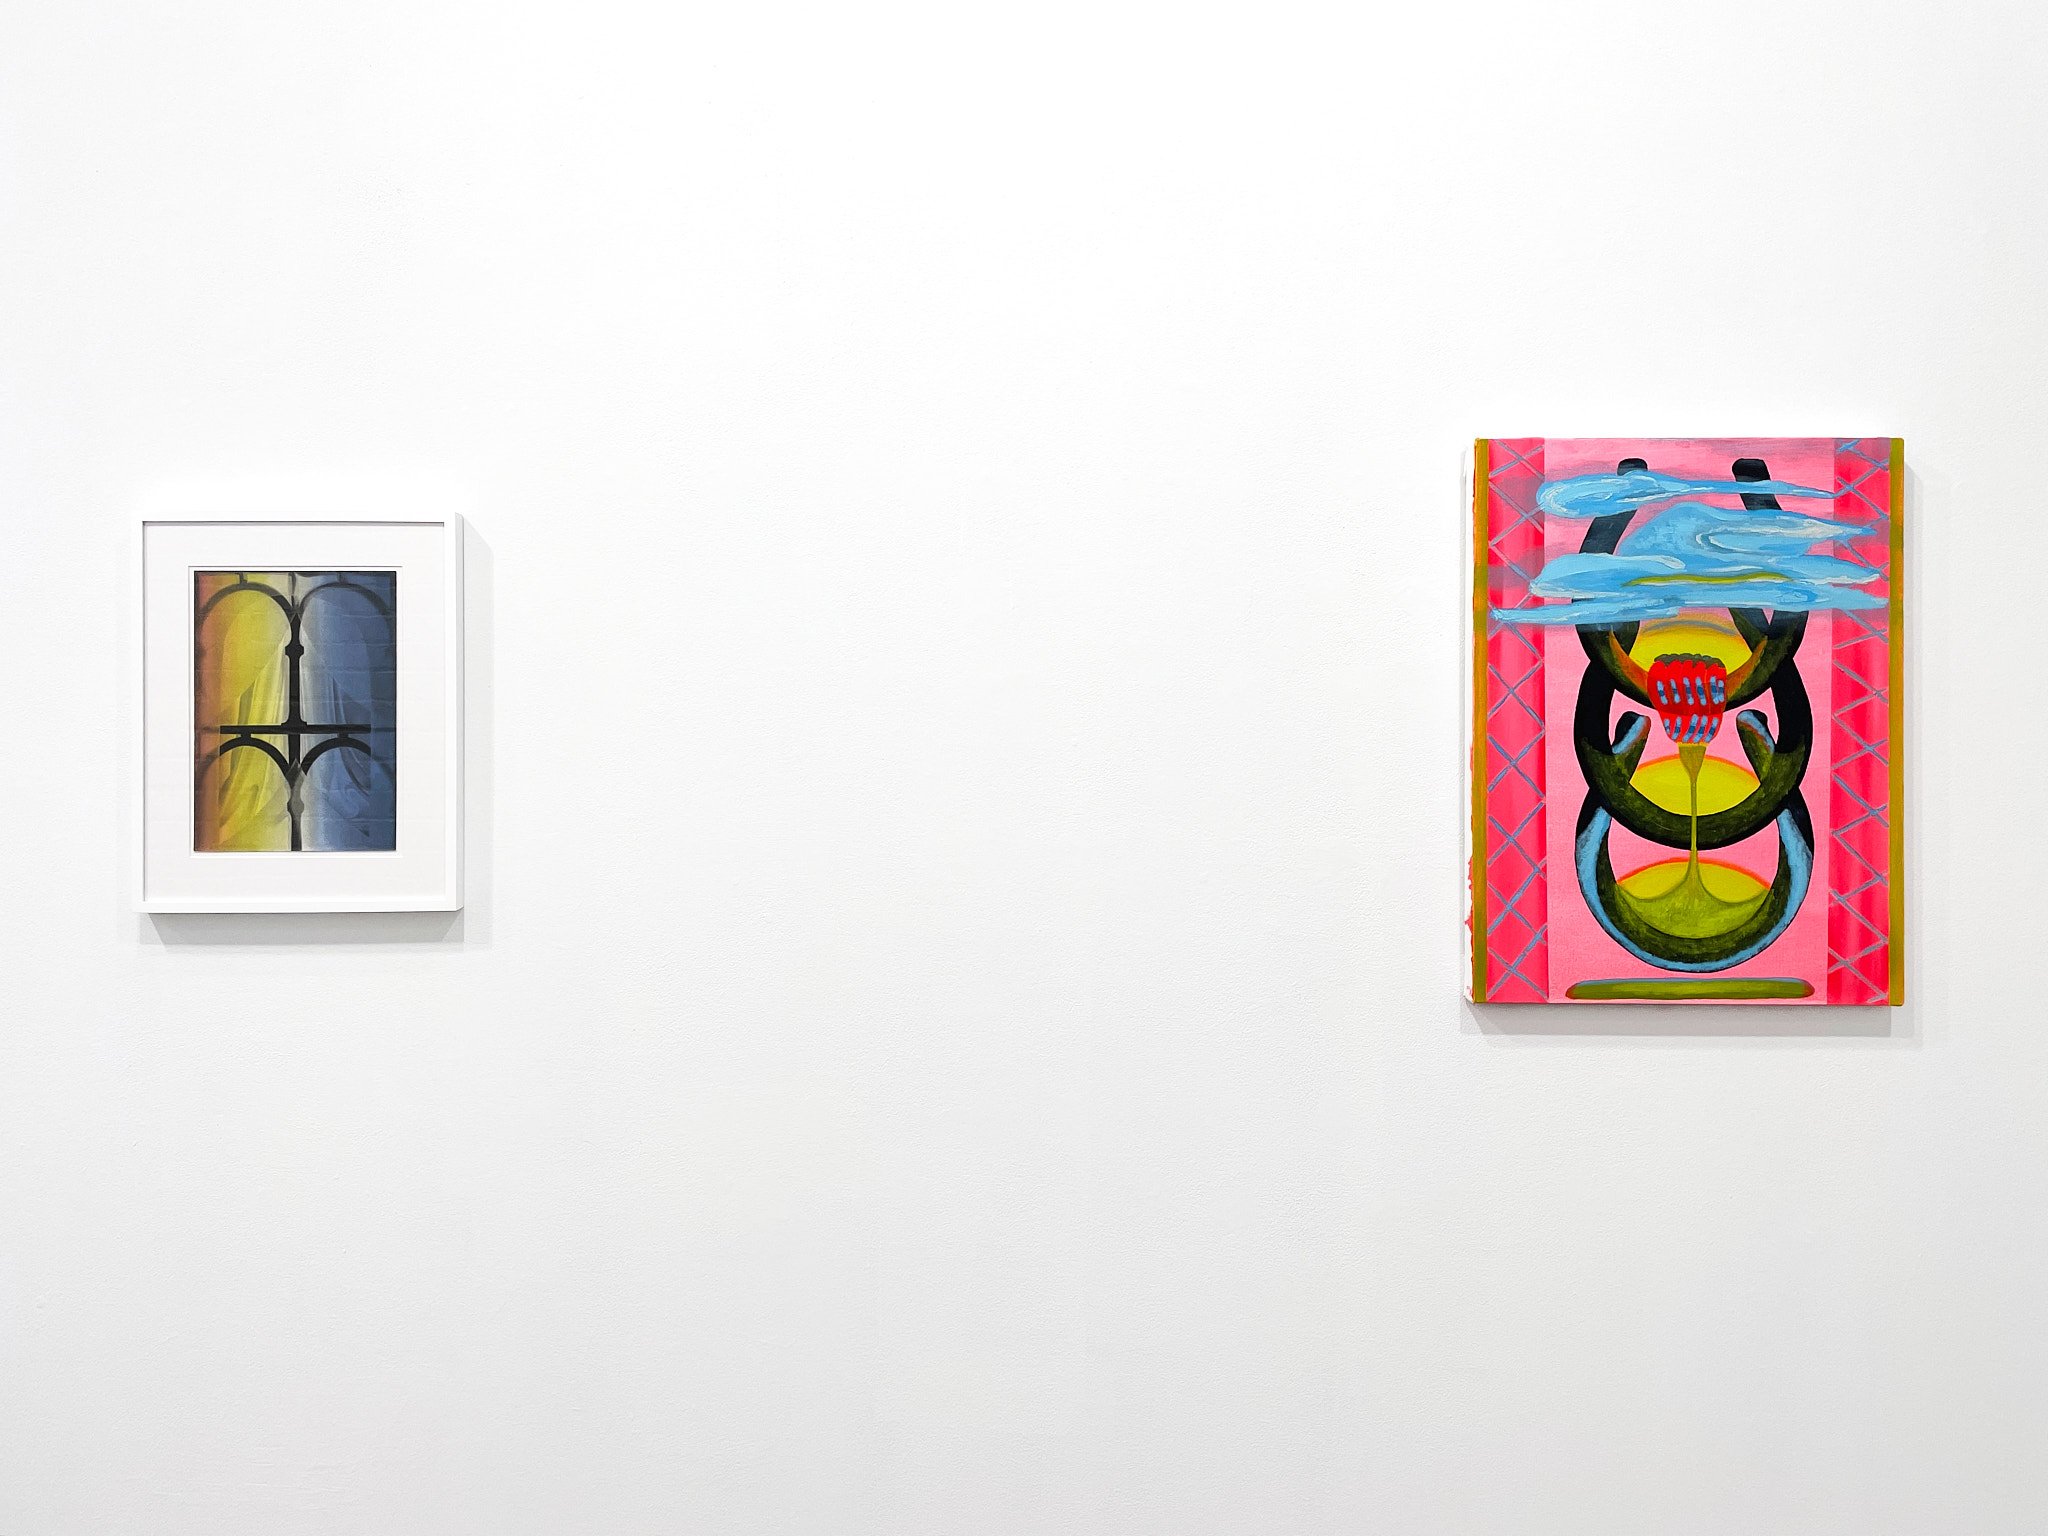  Installation View,  Reveries , Peep Projects 